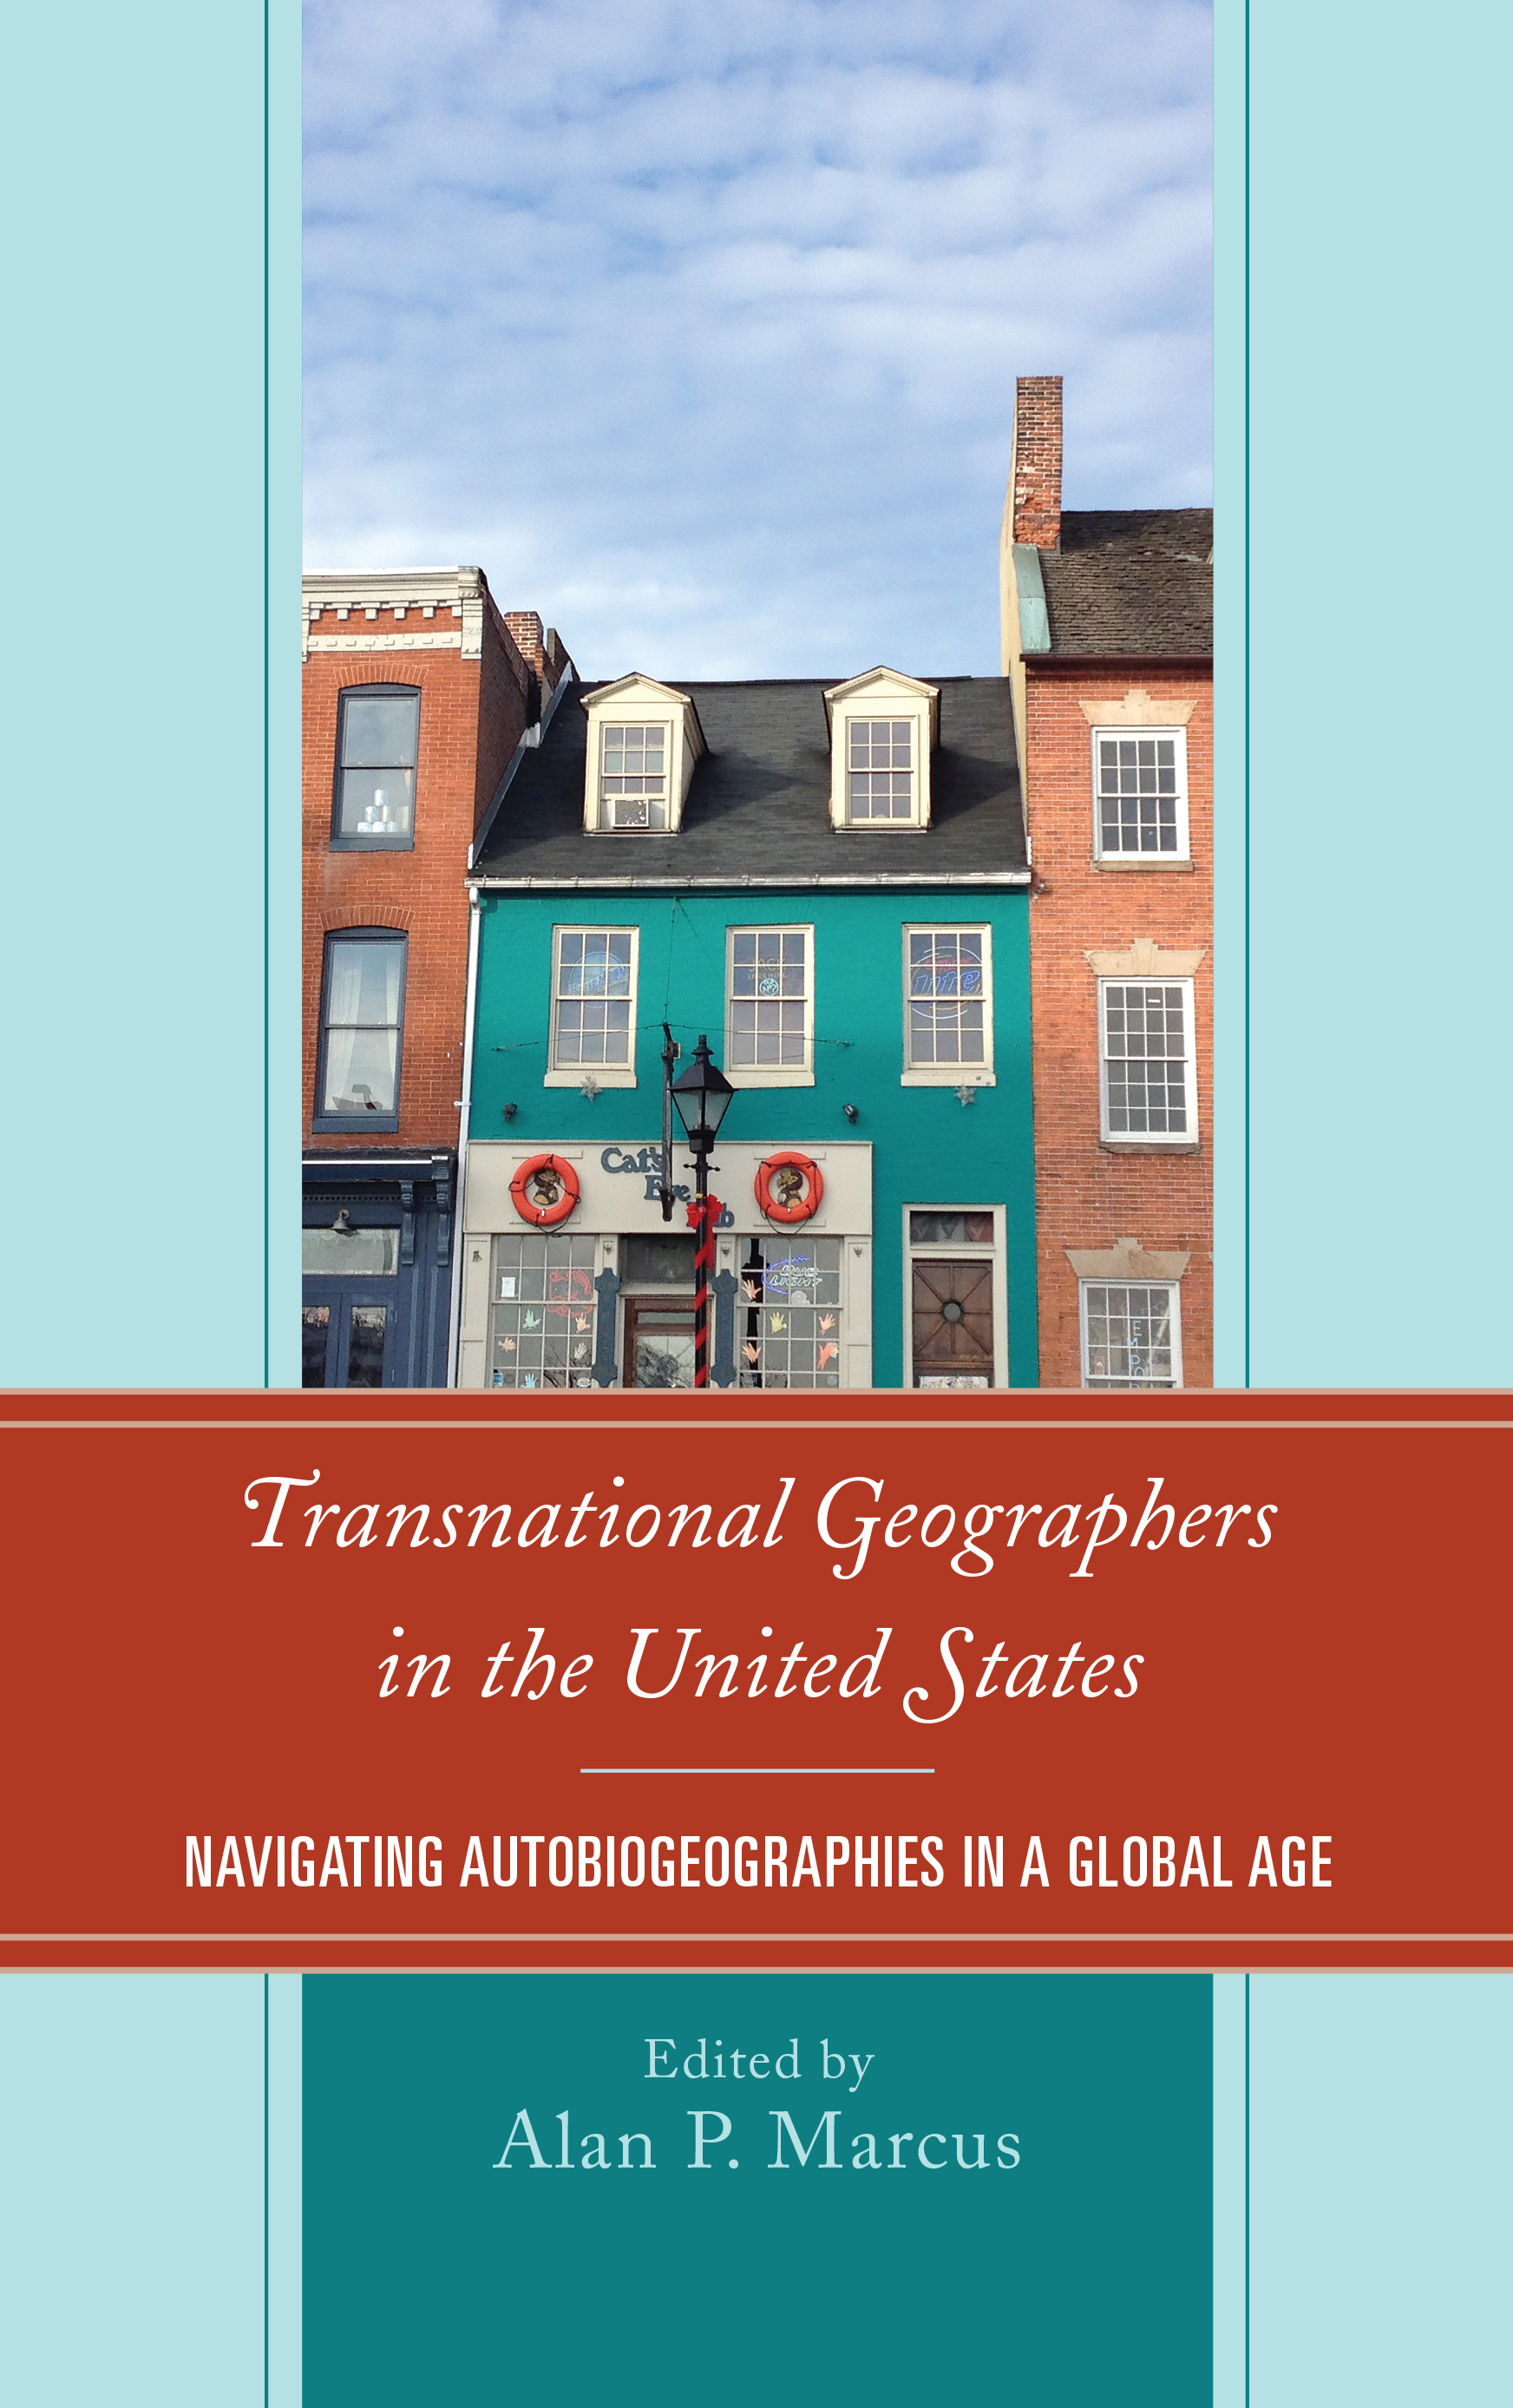 Transnational Geographers in the United States: Navigating Autobiogeographies in a Global Age